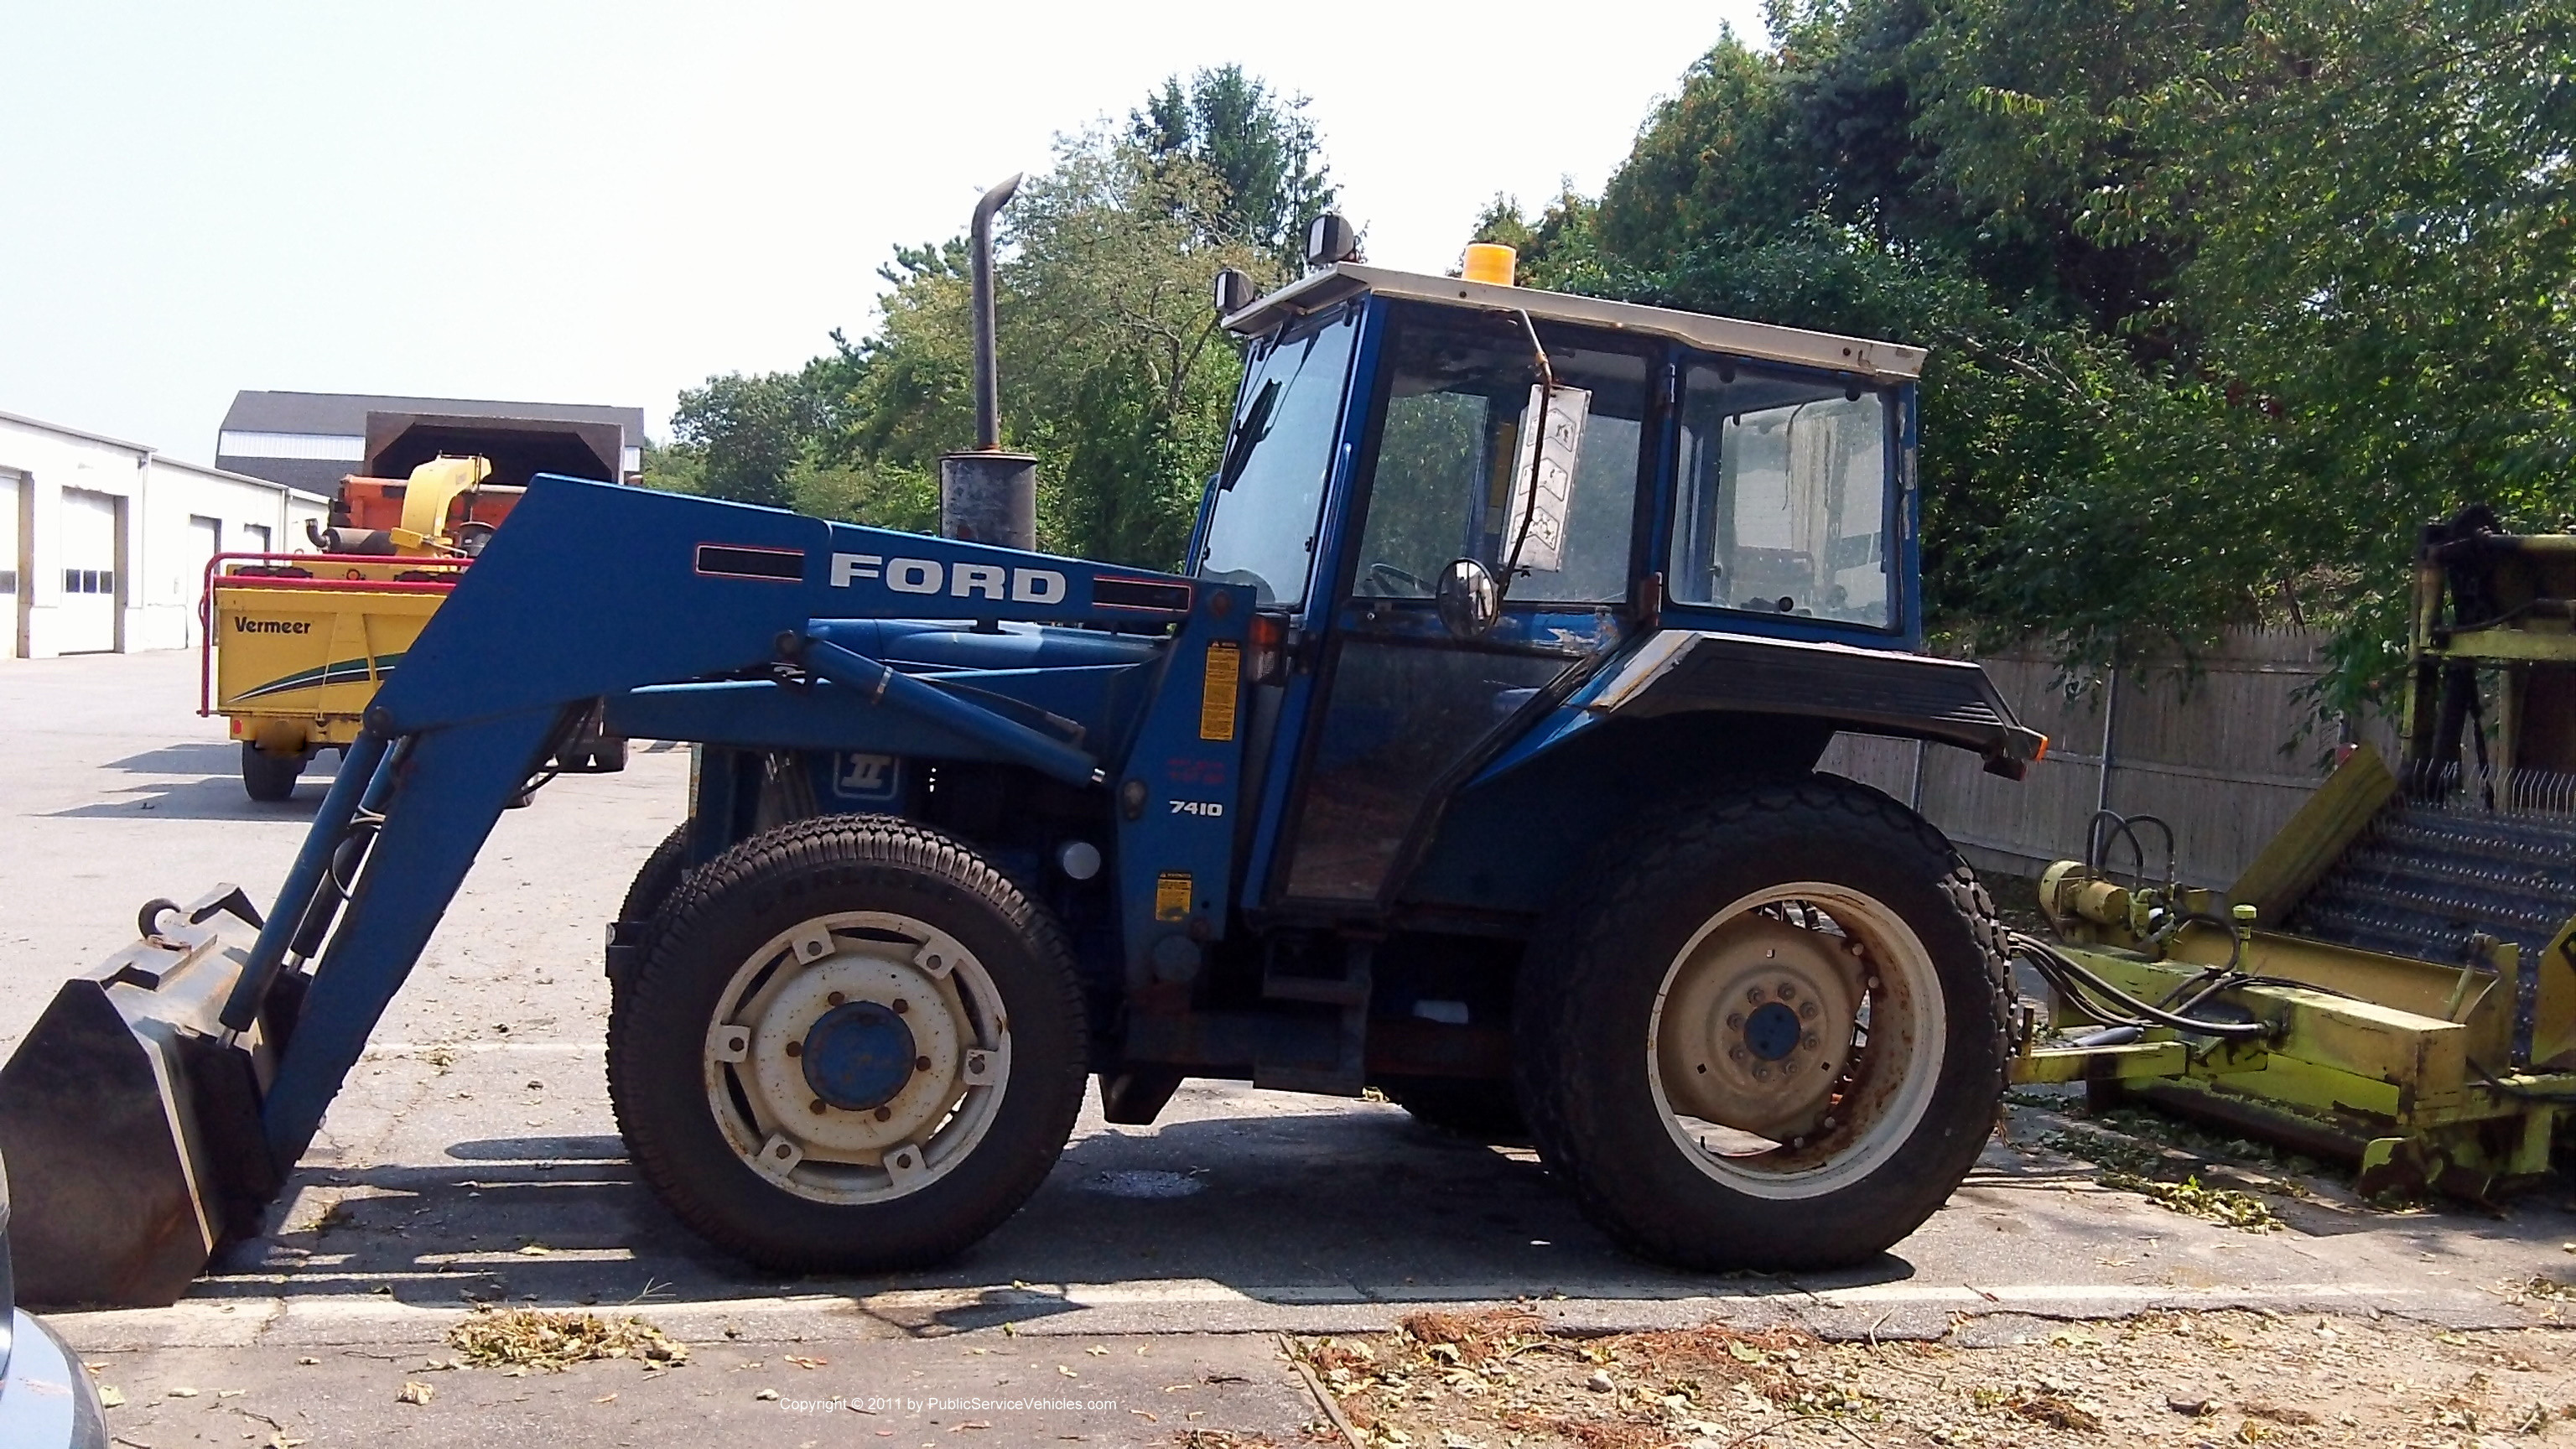 A photo  of Barrington Public Works
            Tractor 51[C], a 1989 Ford Tractor             taken by Kieran Egan